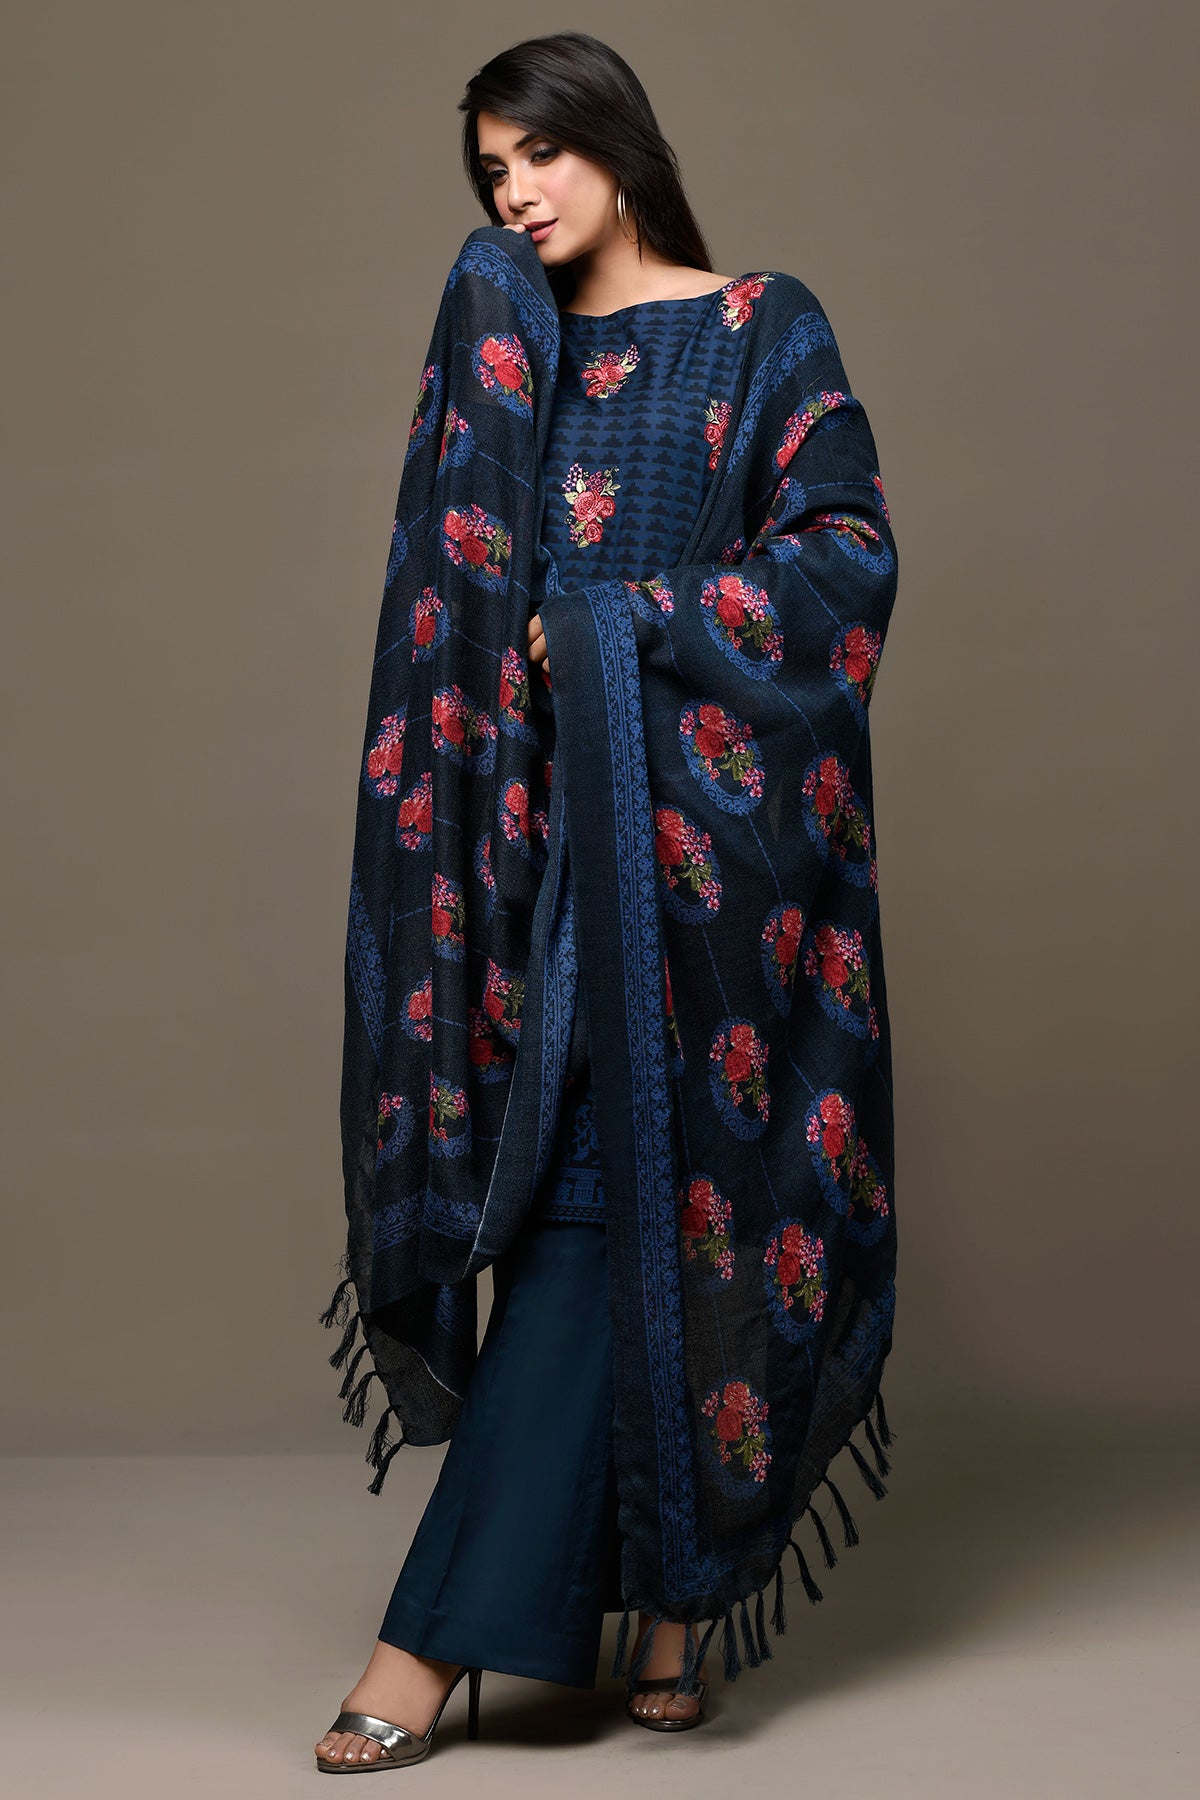 Dyed, Printed & Embroidered Wool Shawl Suit